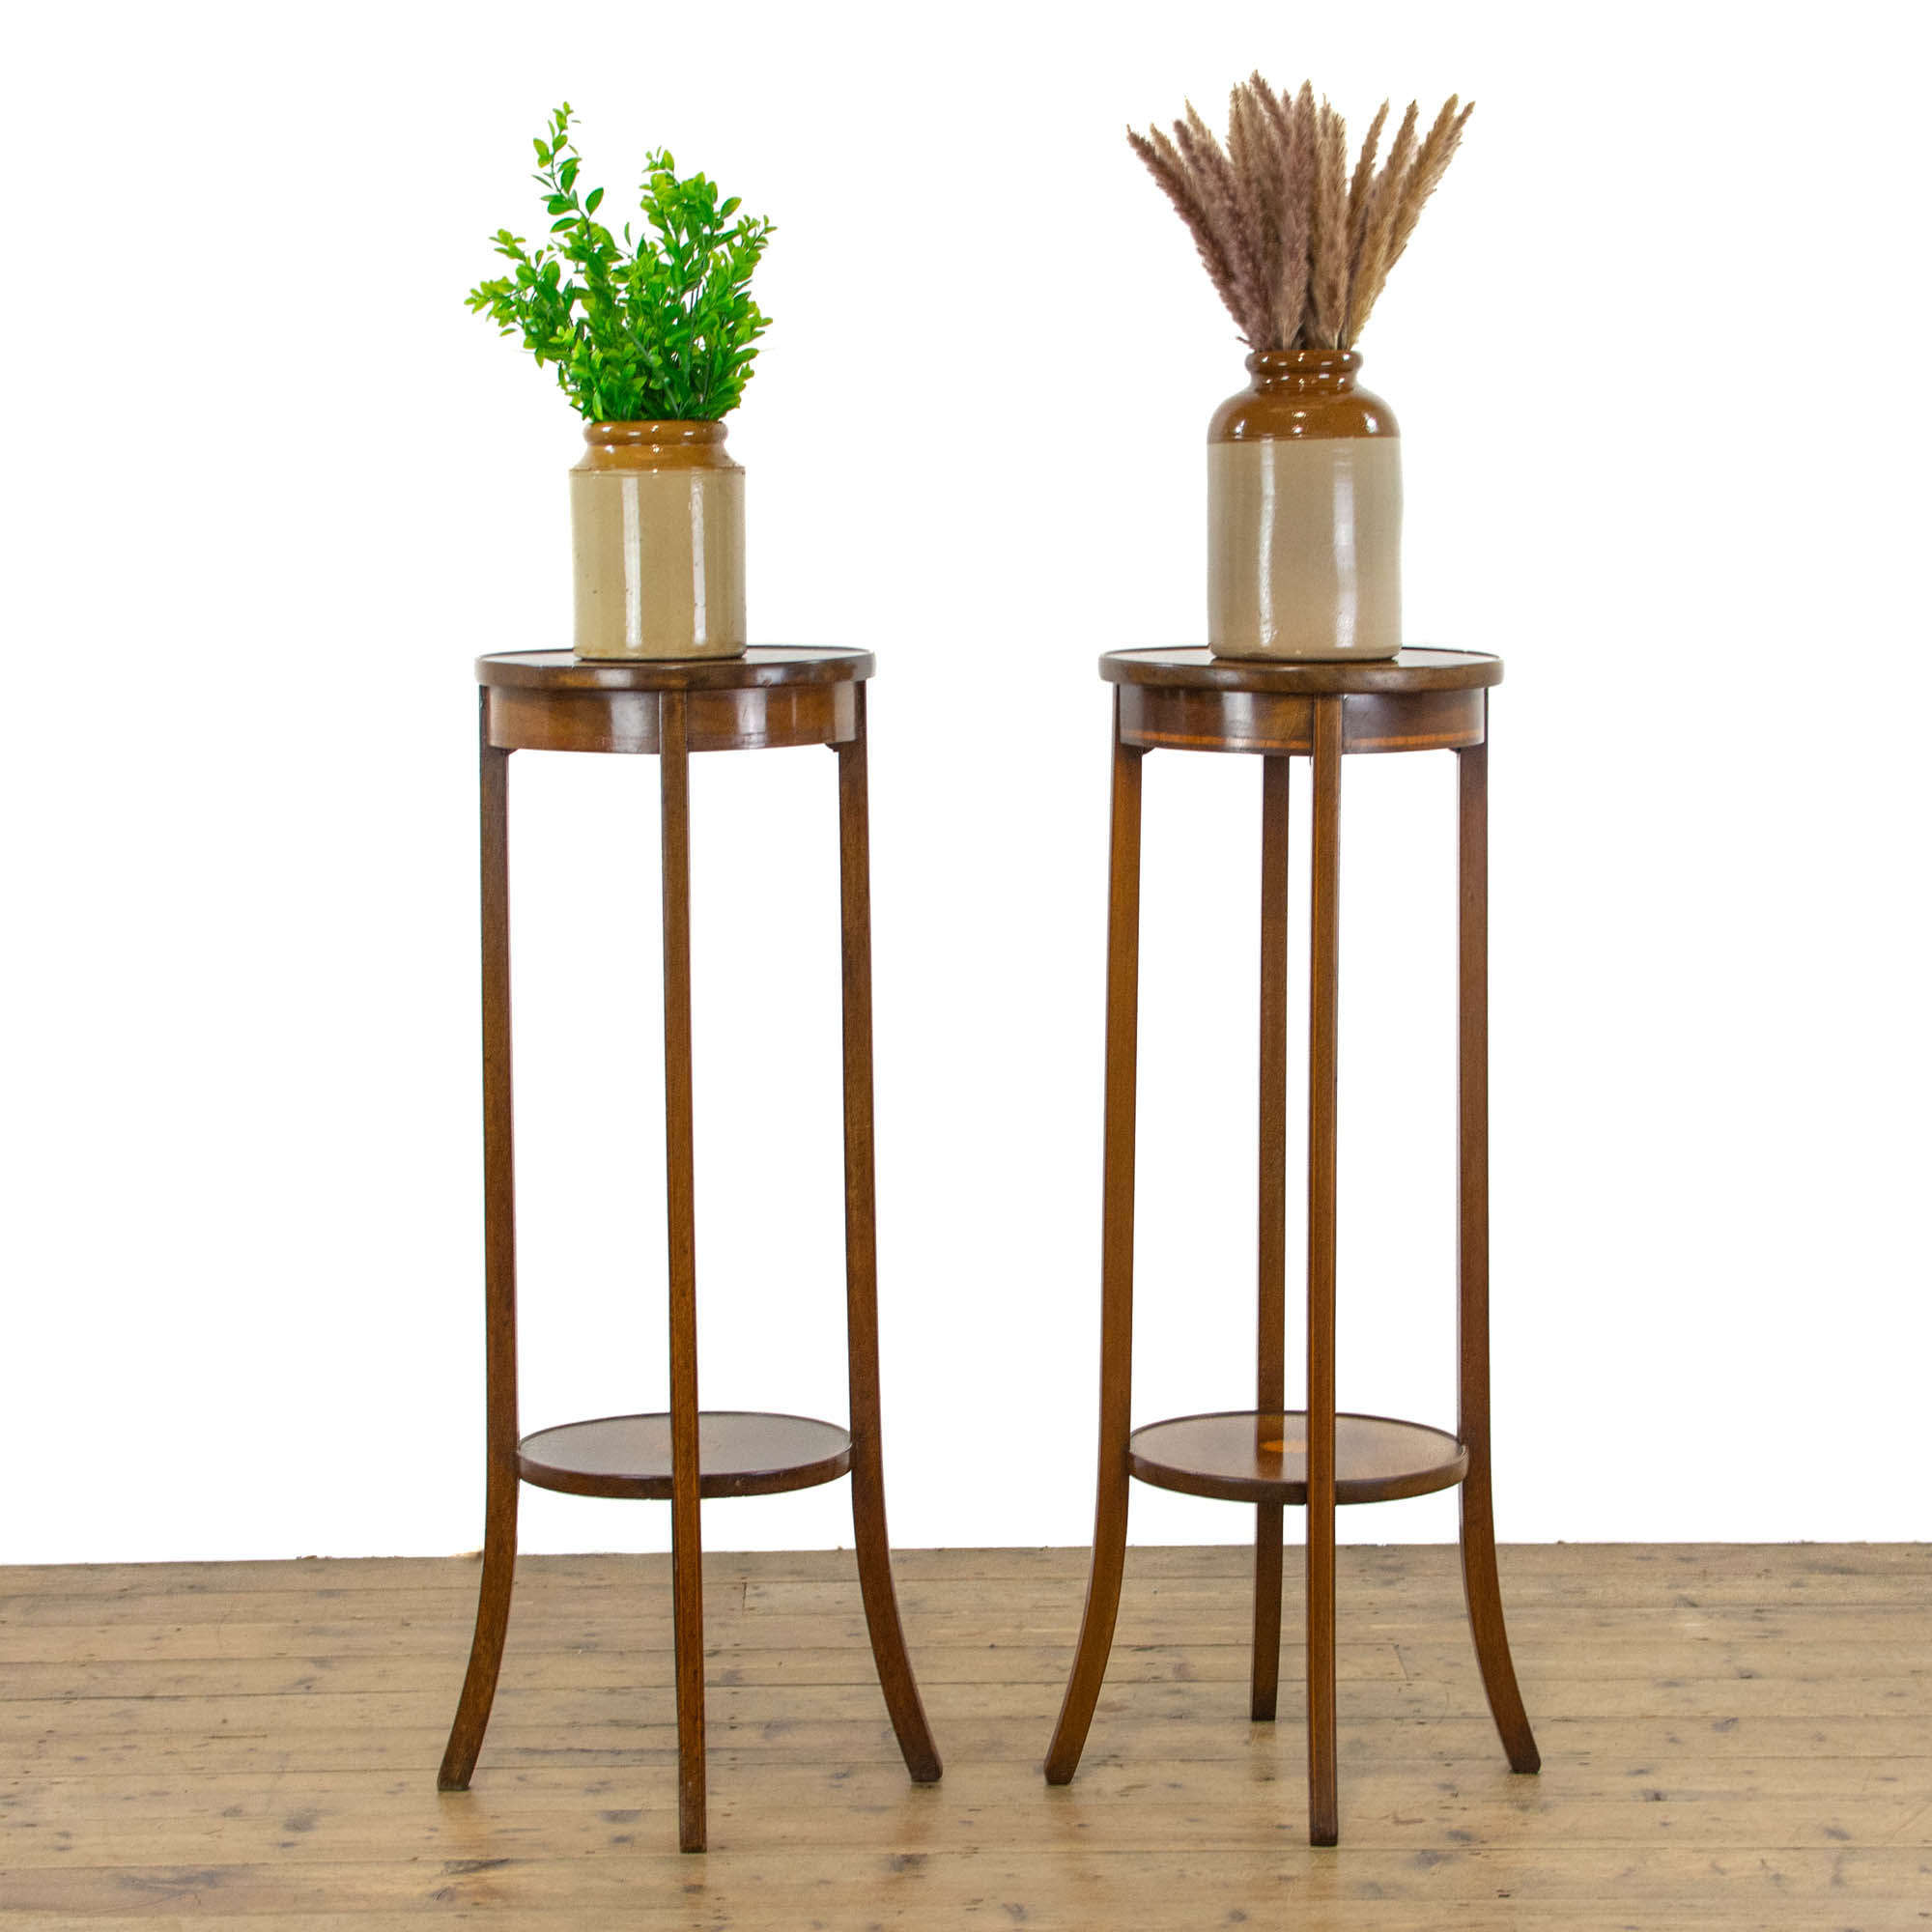 Pair of Edwardian Mahogany Plant Stands